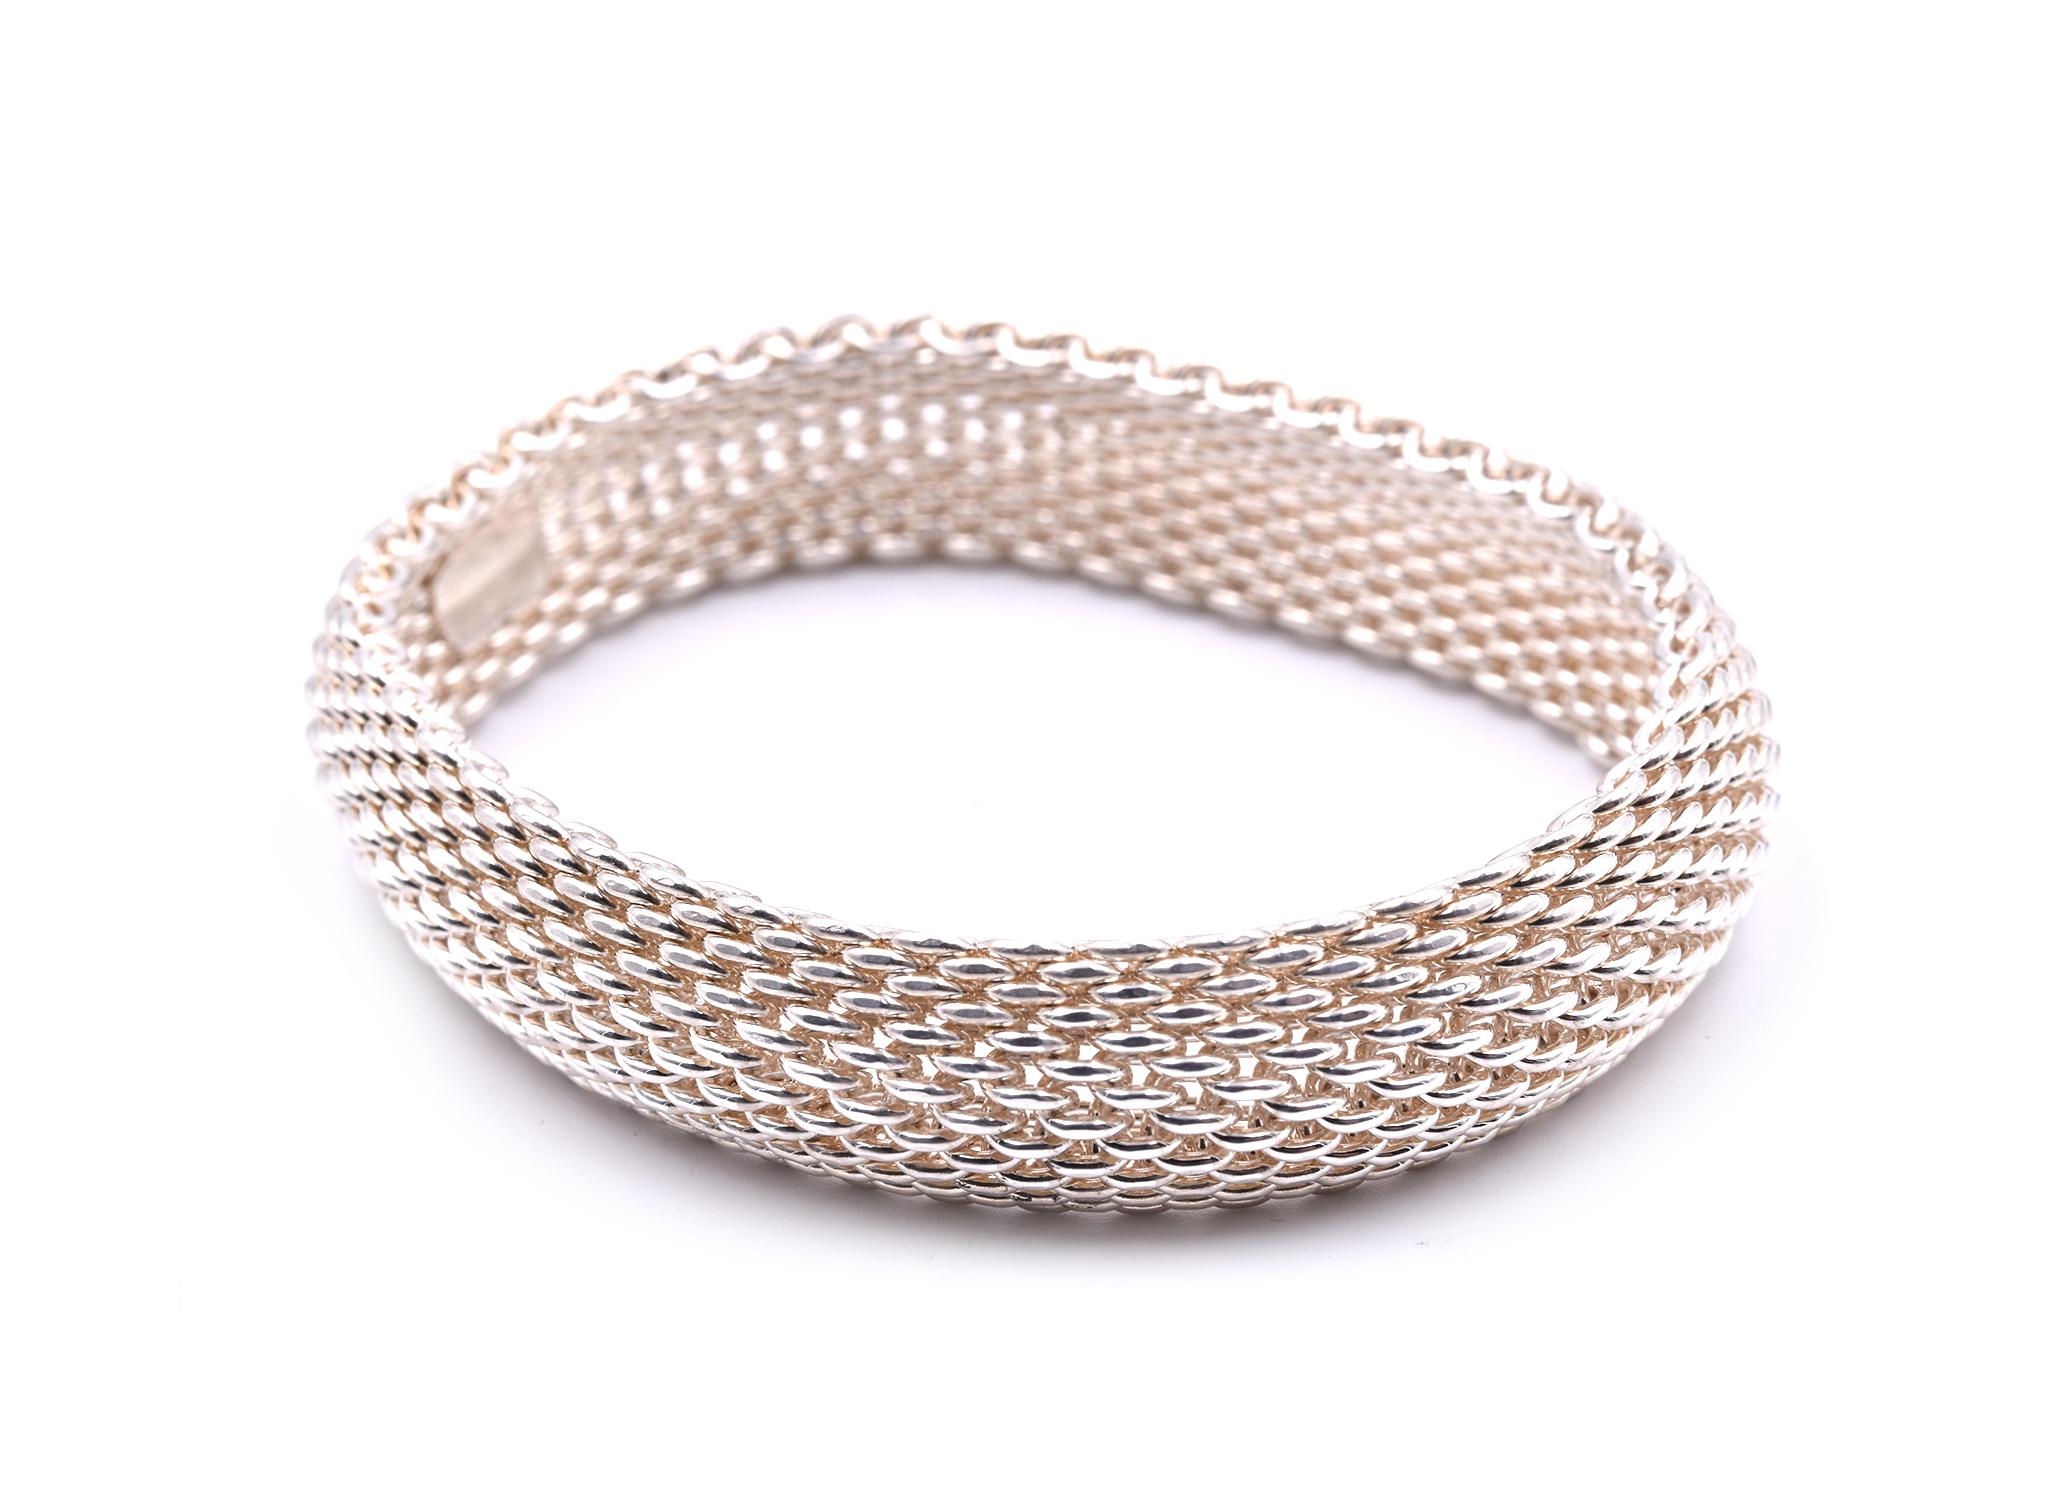 Designer: Tiffany & Co. 
Material: sterling silver
Dimensions: bracelet has an inner diameter of 7 ½ inches and it is 15.30mm wide
Weight: 59.66 grams
